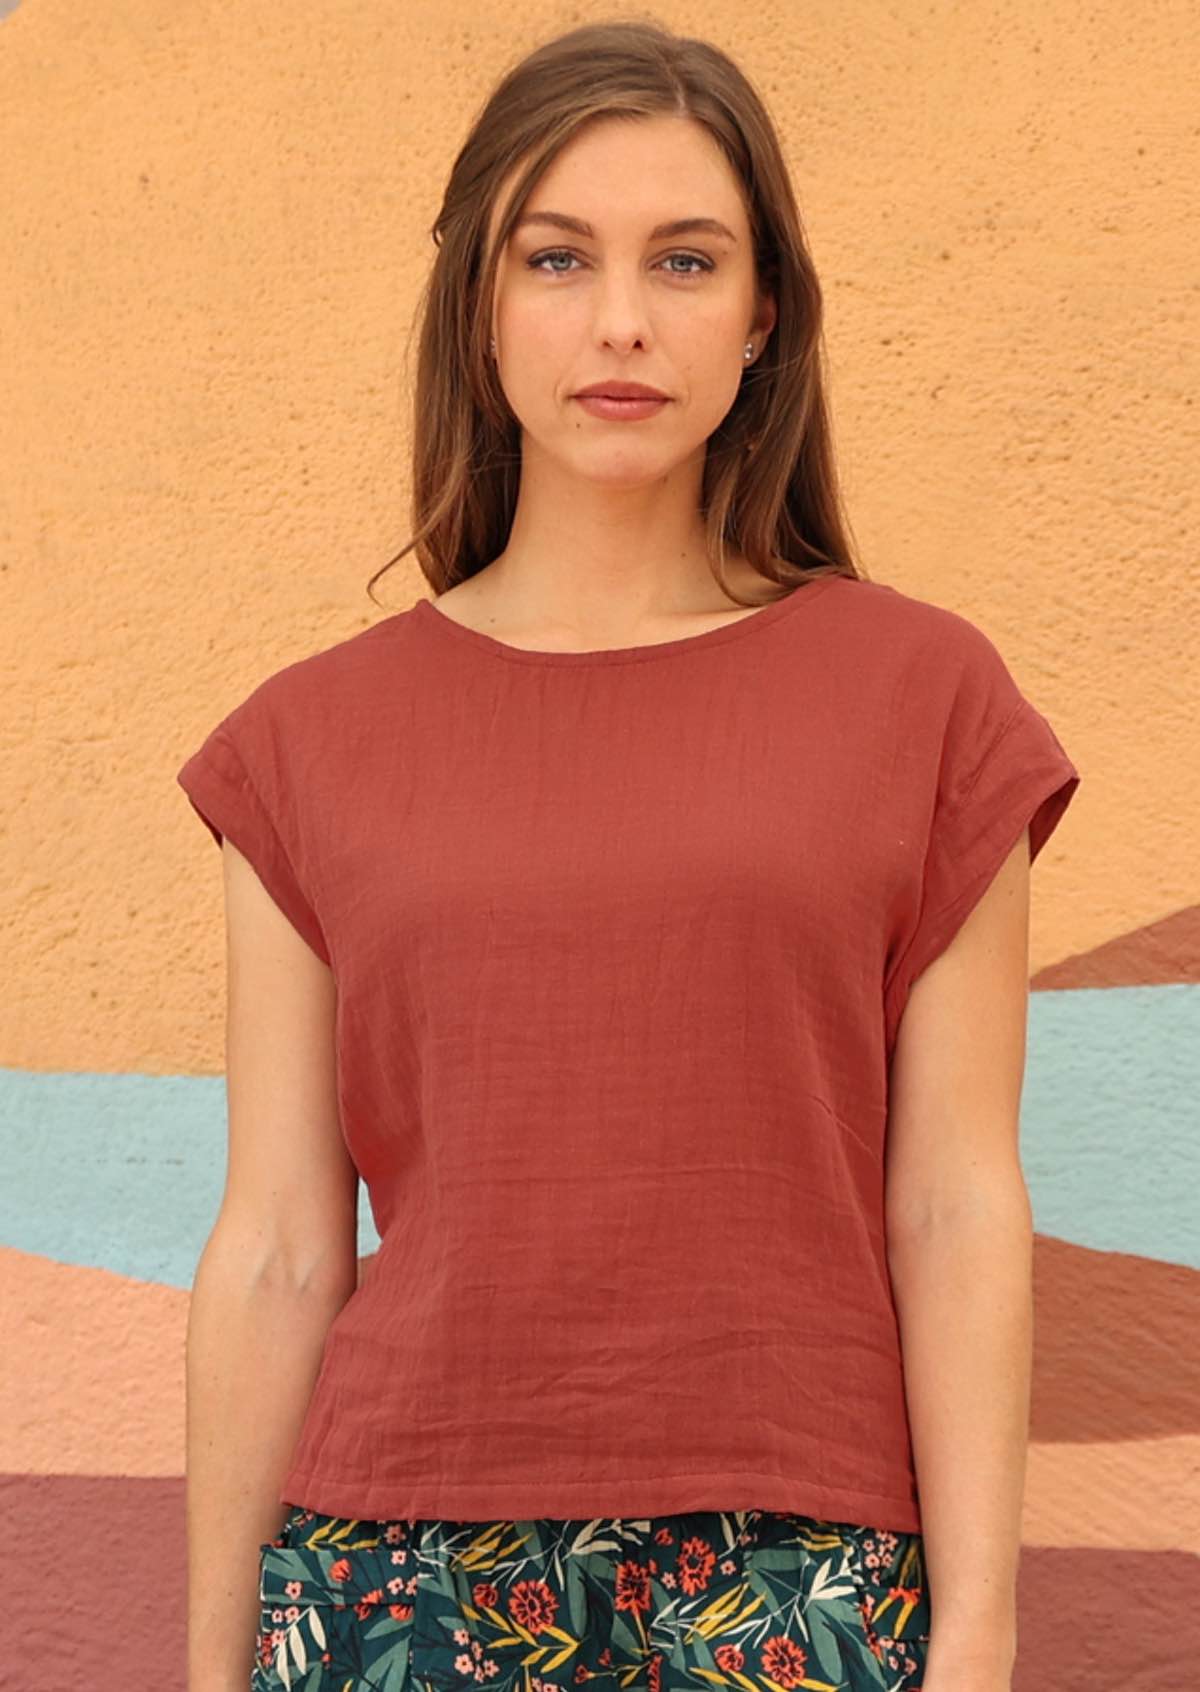 Simple cotton top with round neckline and cap sleeves